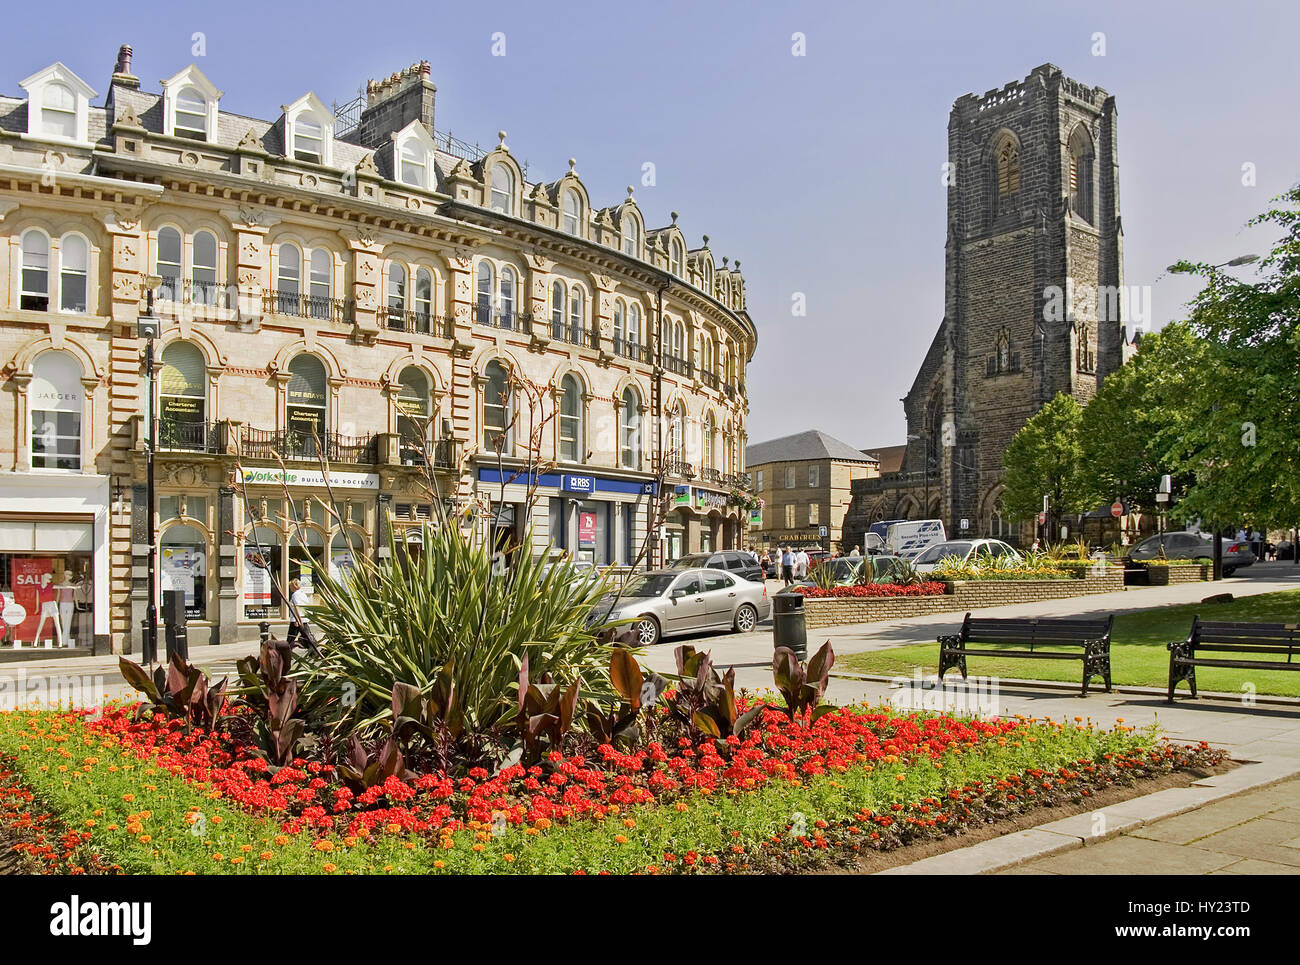 Harrogate (or Harrogate Spa) is a spa town in North Yorkshire, England. The town is a popular tourist destination; its spa waters, RHS Harlow Carr gar Stock Photo